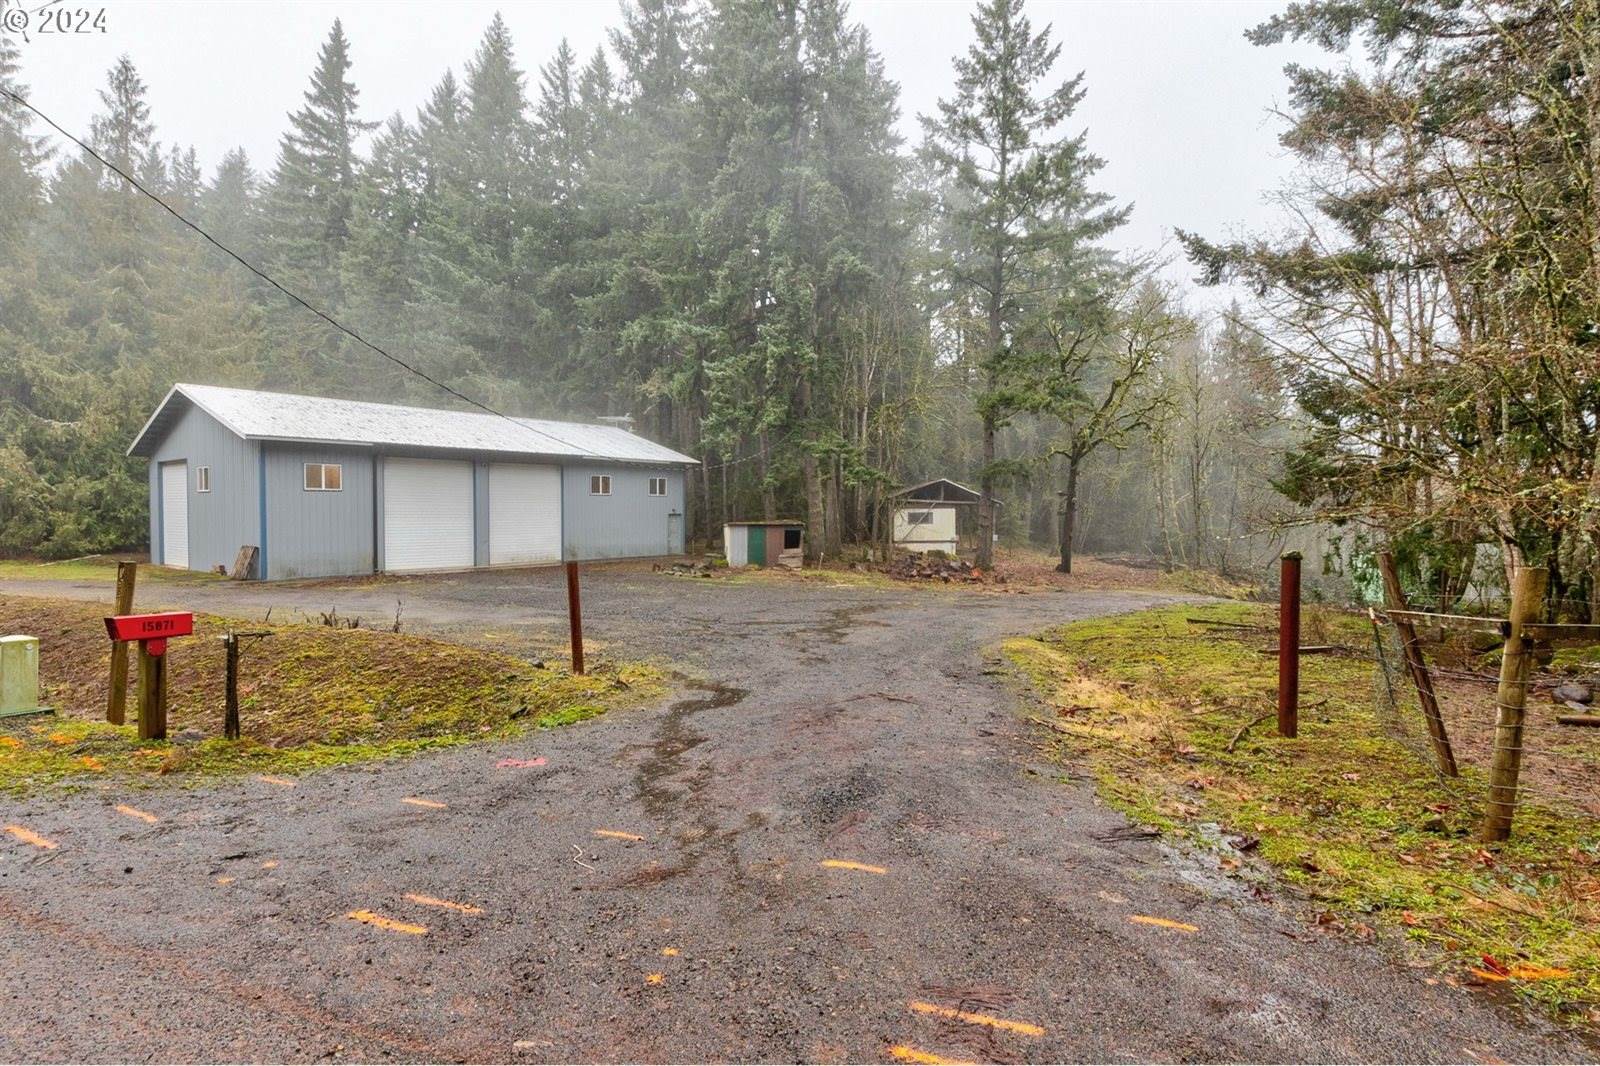 15871 South Howards Mill Rd, Mulino, OR 97042